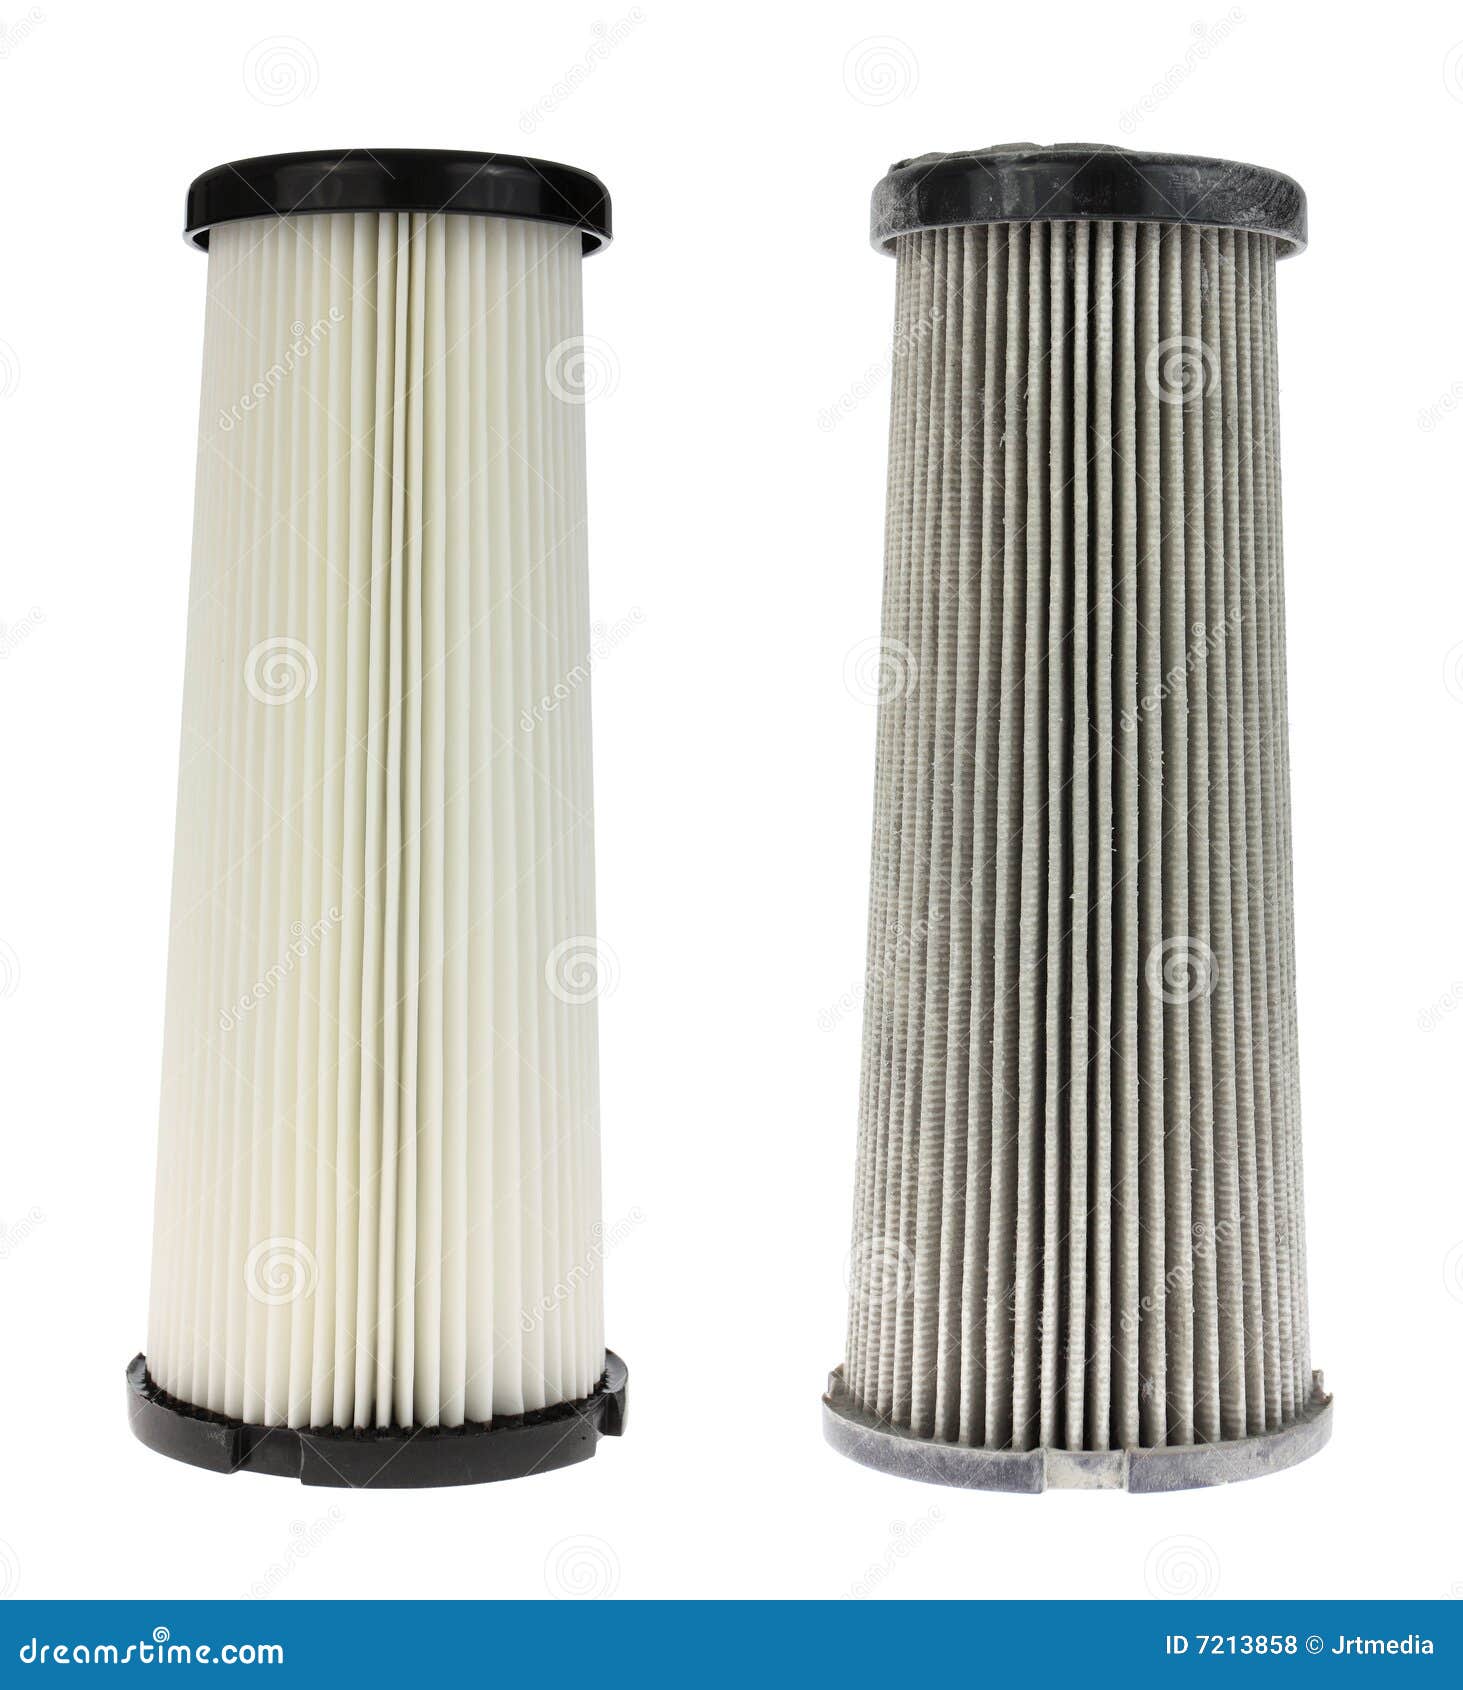 two air filters